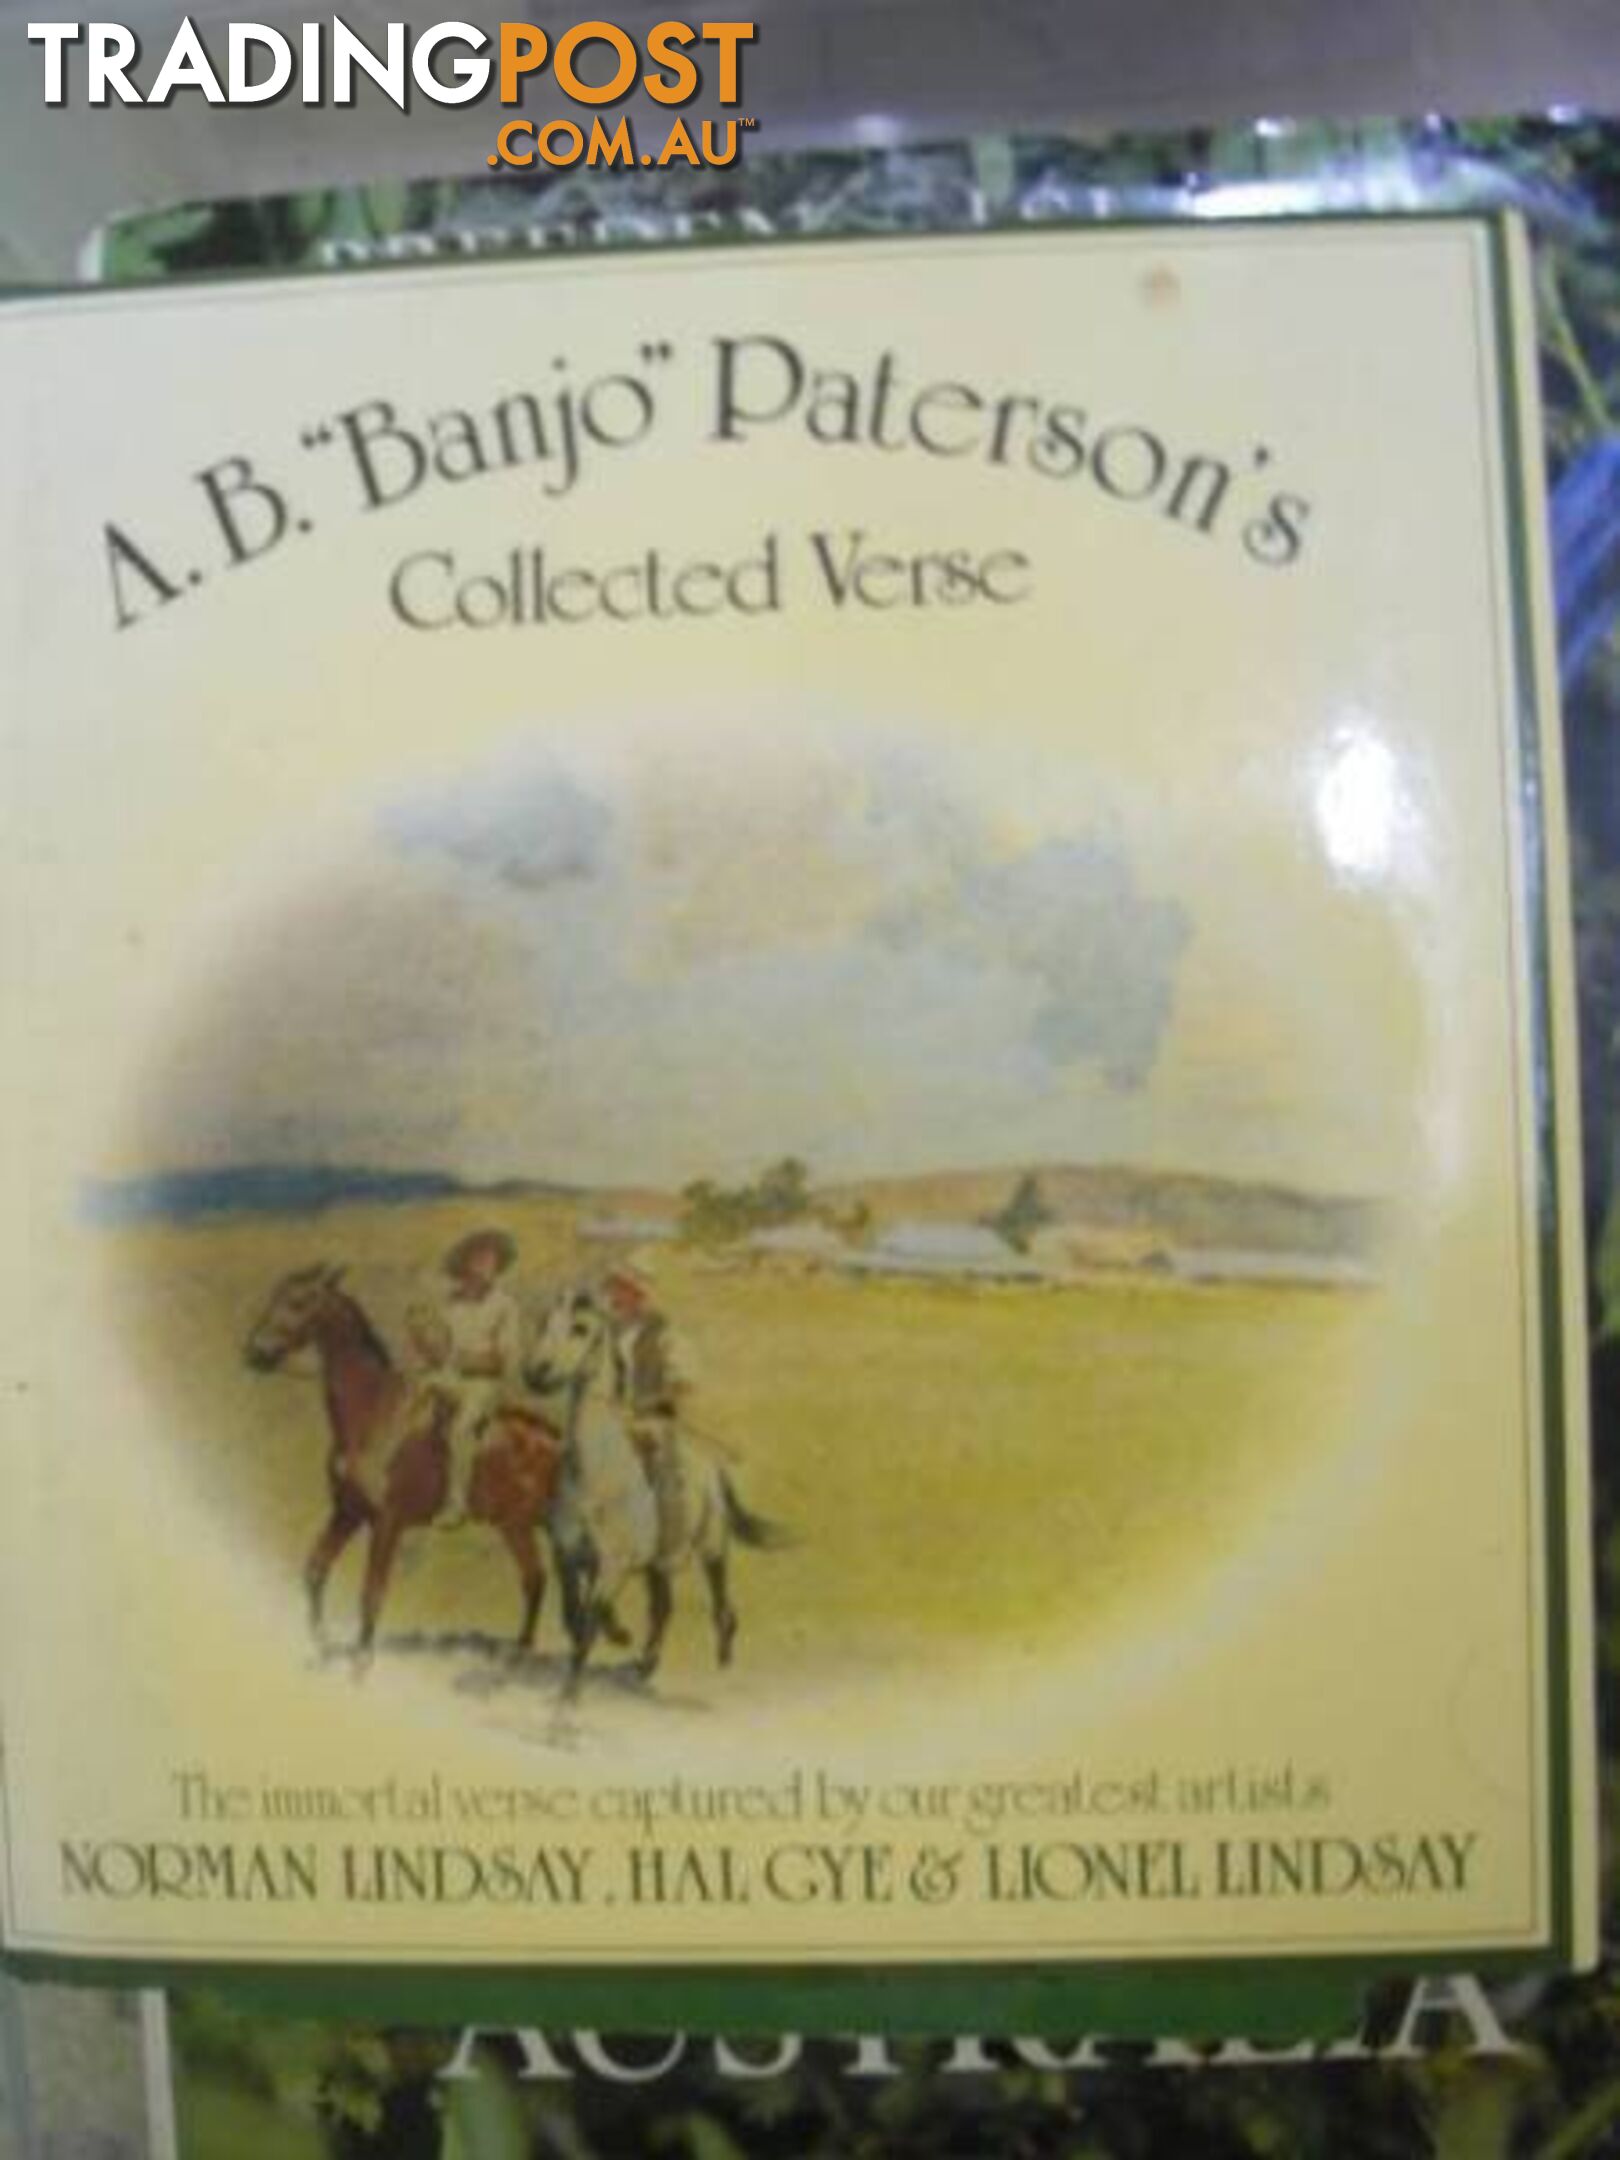 A.J. "Banjo" Paterson's Collected Verse 1985